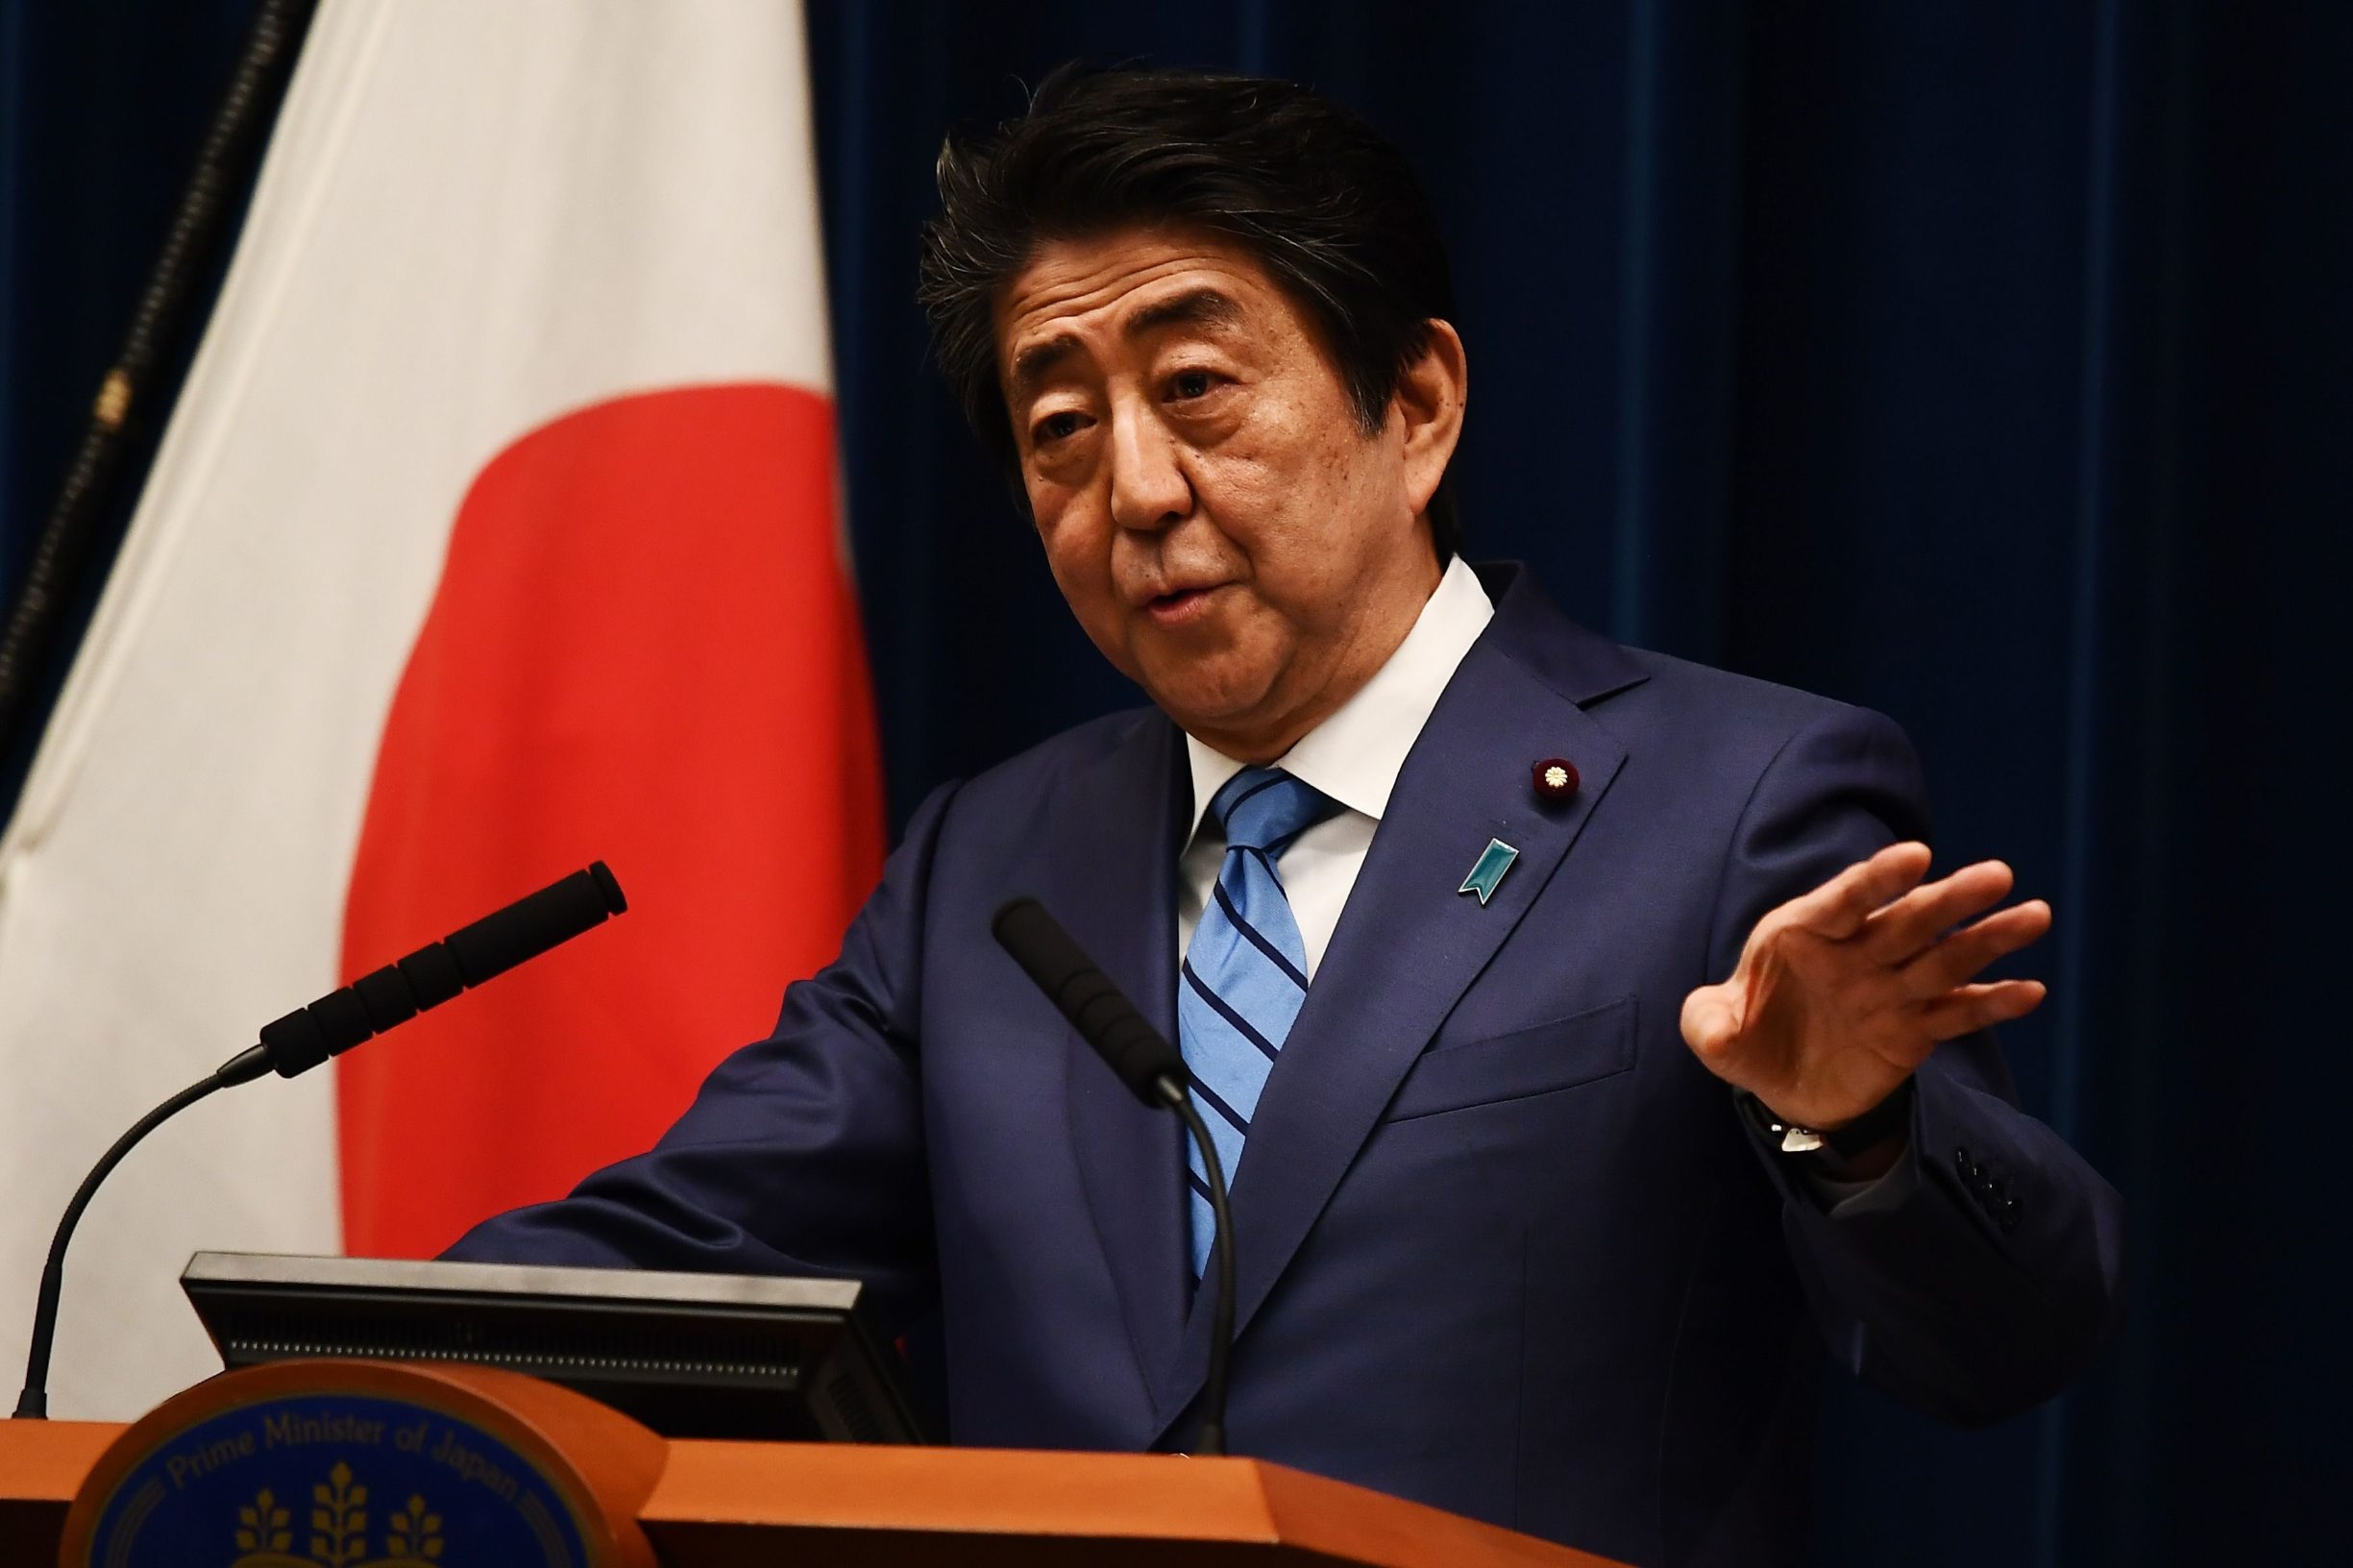 Japanese Prime Minister Shinzo Abe talks to the media during a press conference in Tokyo on March 14, 2020. (Photo by CHARLY TRIBALLEAU / AFP)